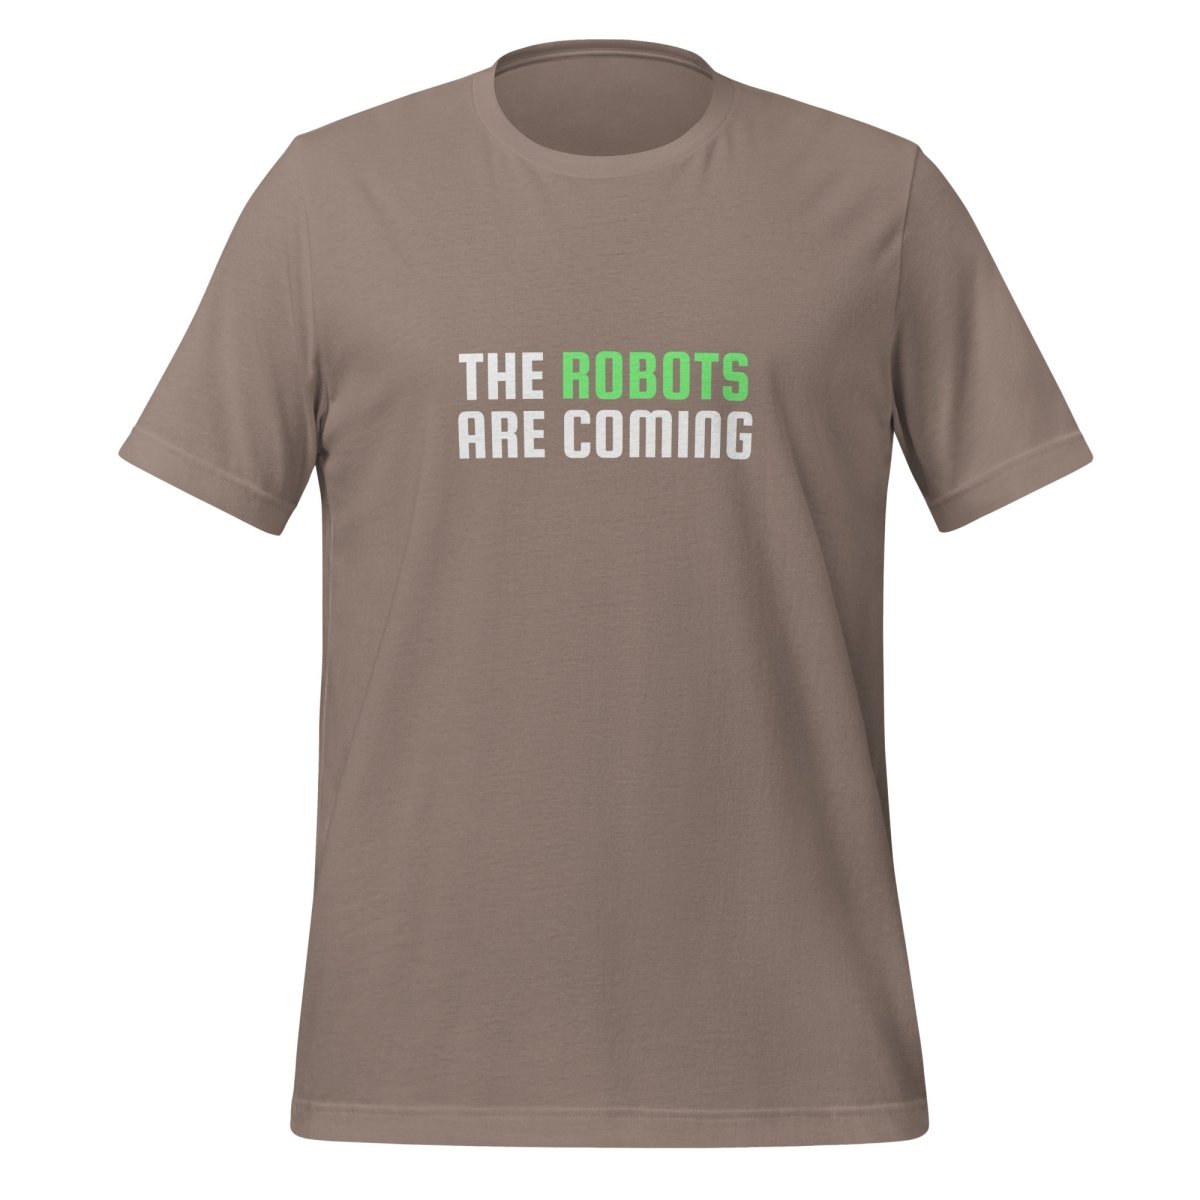 The Robots Are Coming (Green) T - Shirt 2 (unisex) - Pebble - AI Store